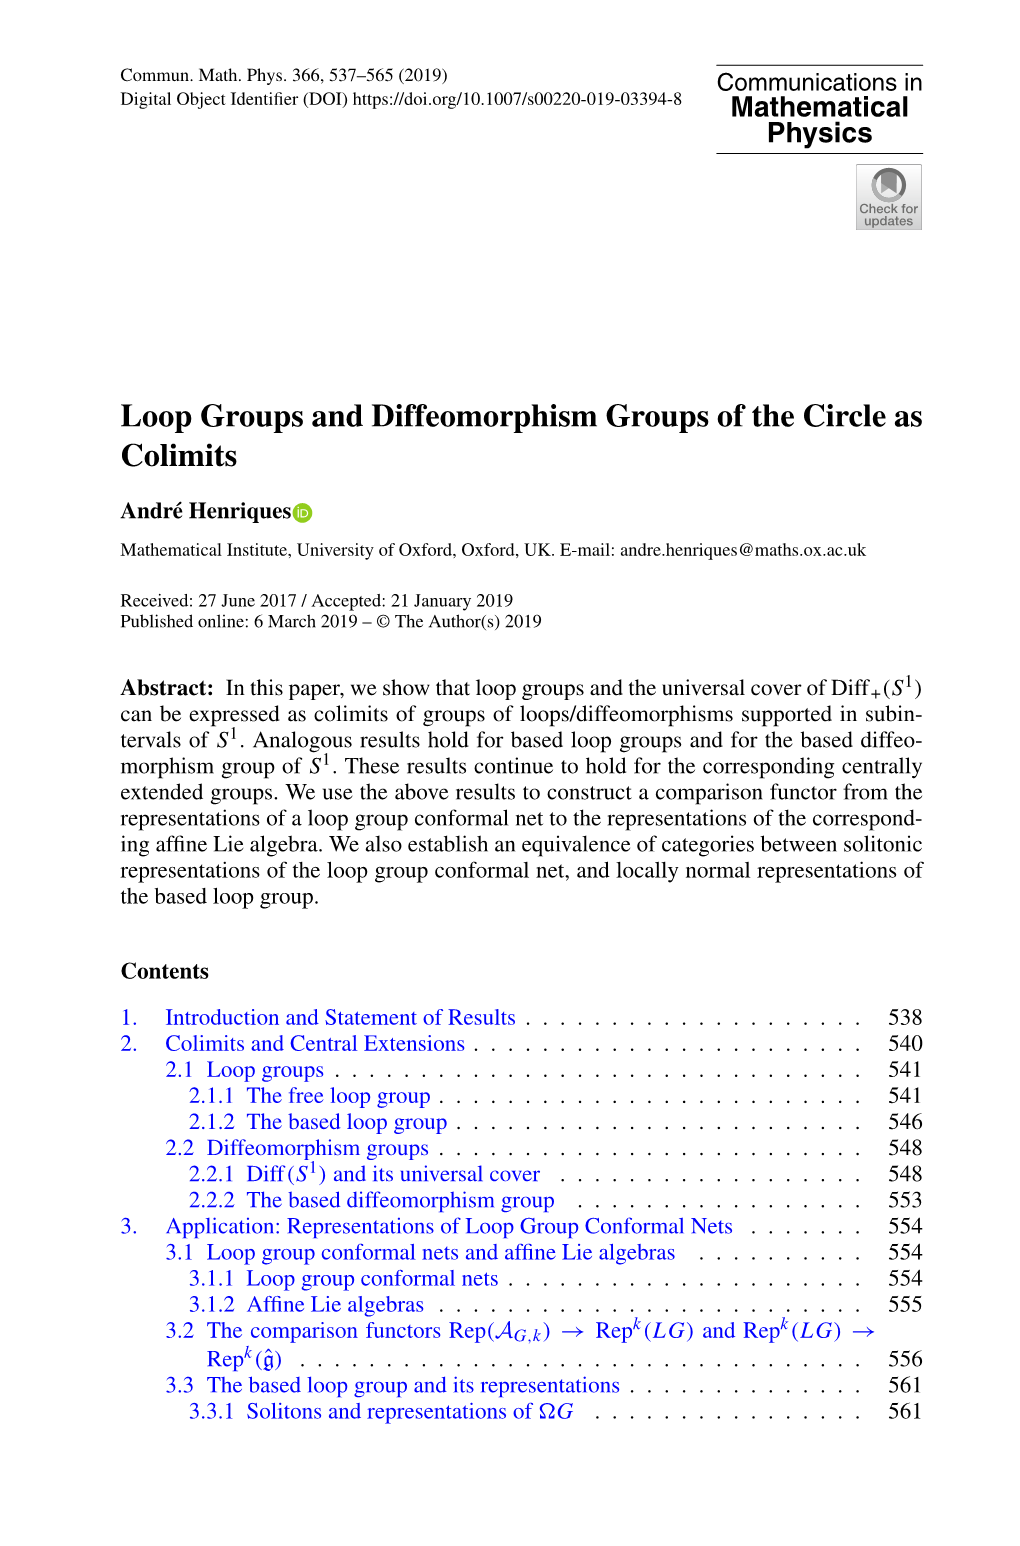 Loop Groups and Diffeomorphism Groups of the Circle As Colimits